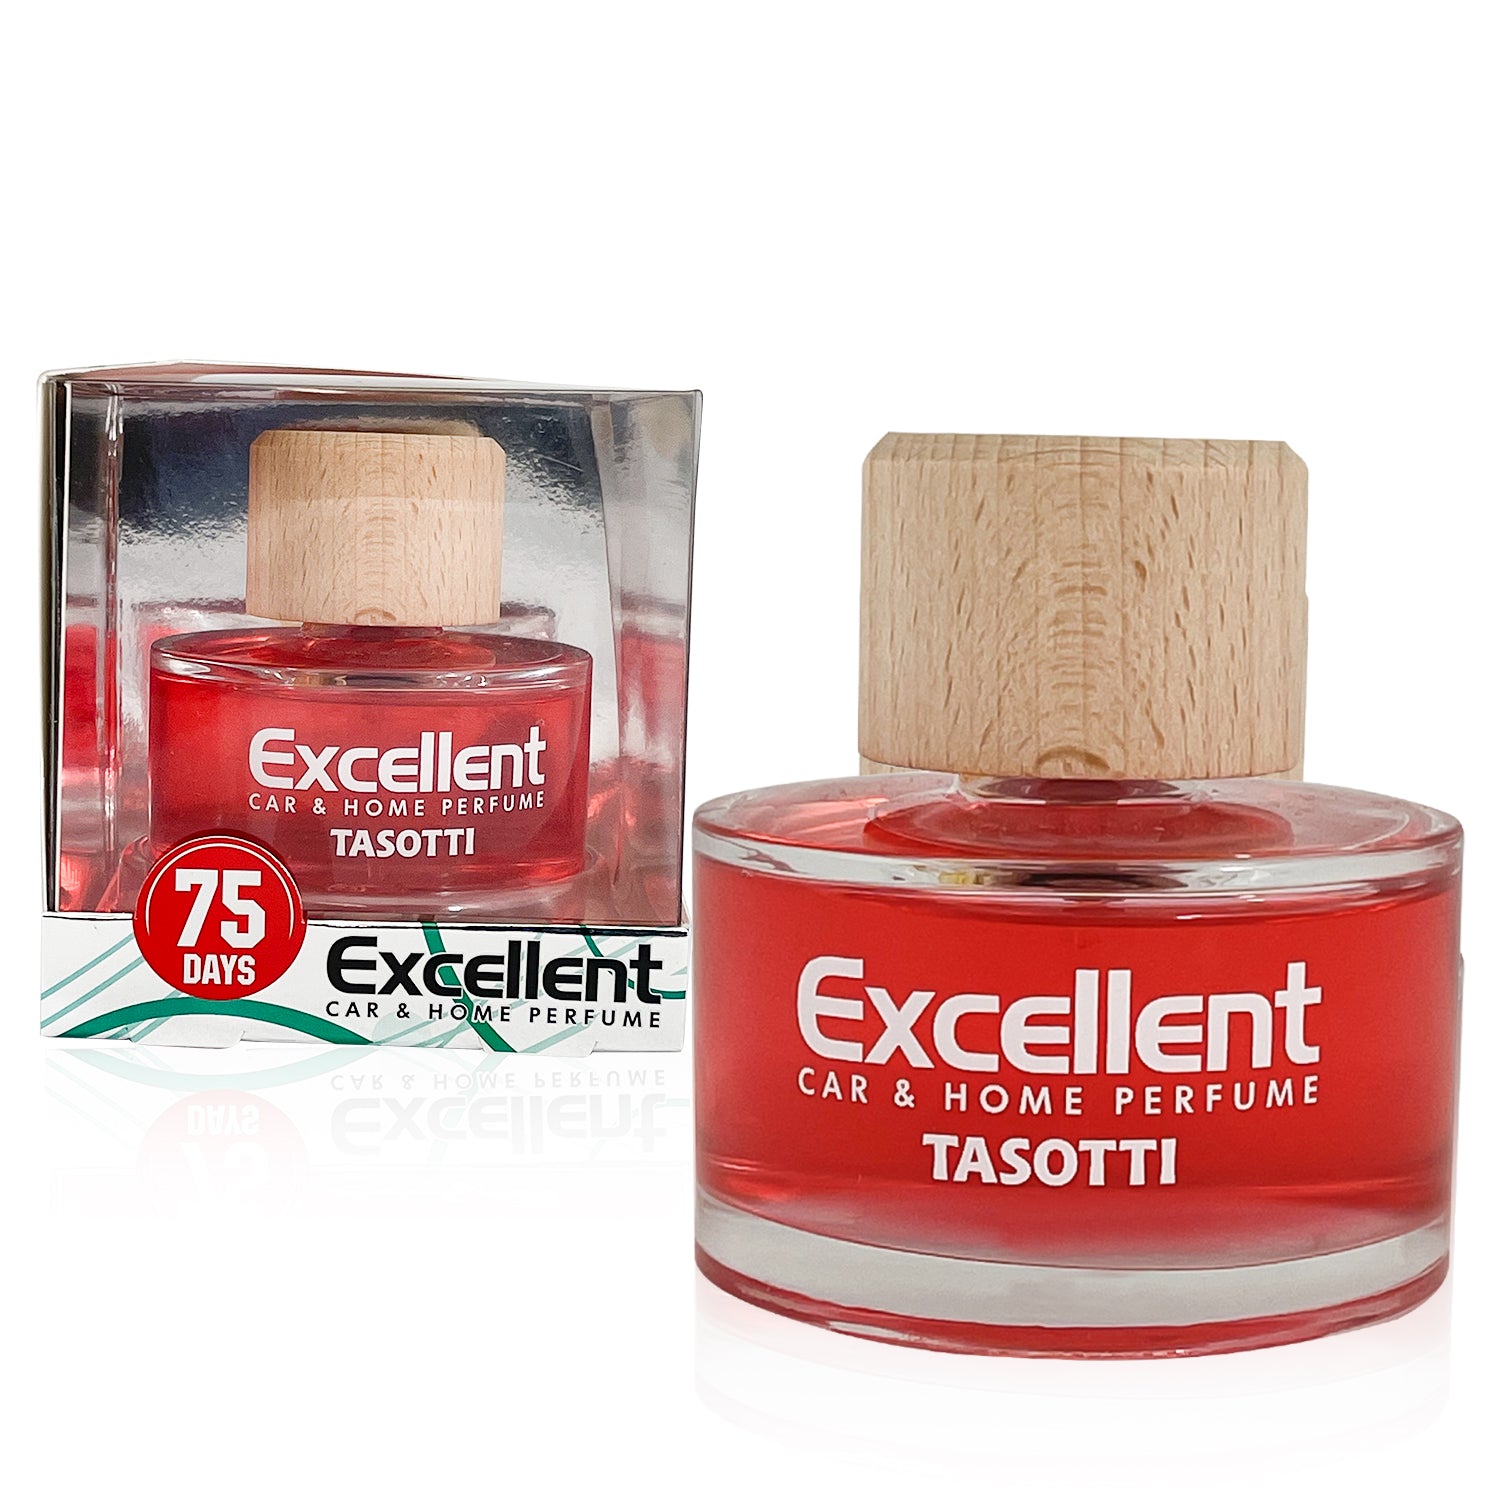 Tasotti Excellent Car Perfume Air Freshener, Luxury Car Air fresheners and Car  Odor Eliminator, Long Lasting Scent Up to 75 Days, Tutti Frutti by GOSO  Direct